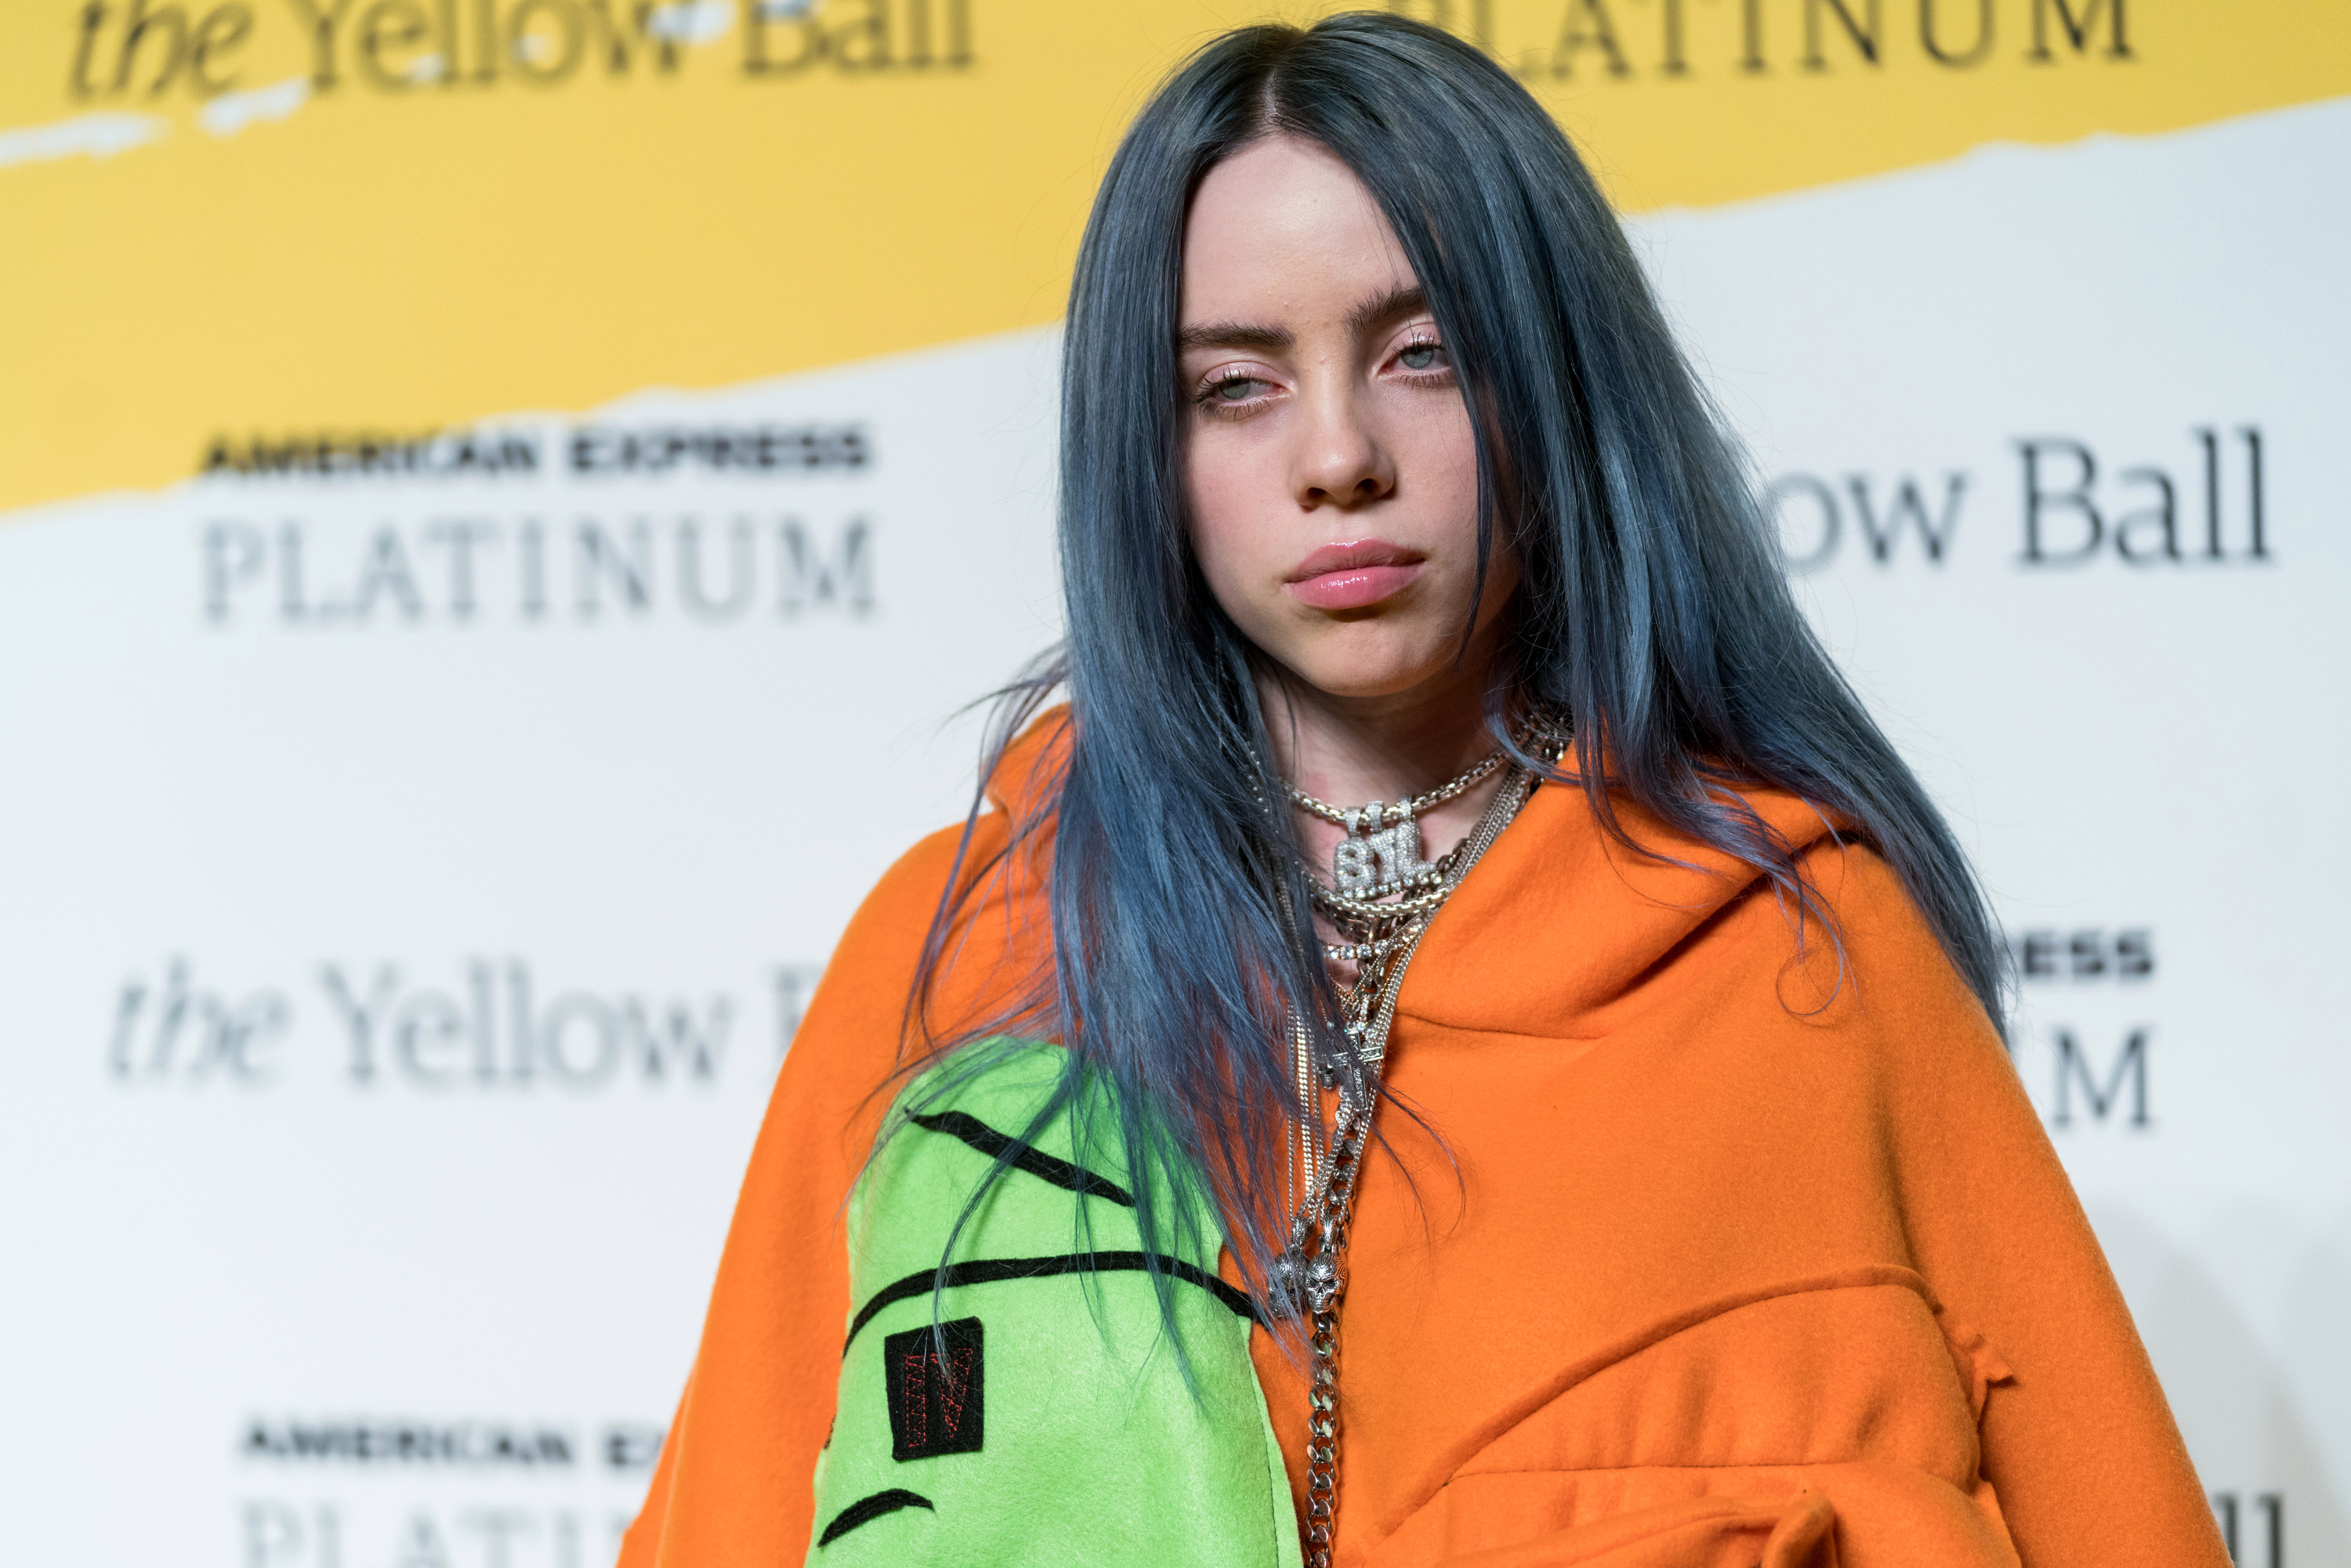 Billie Eilish insists she isn't slamming fame with new song